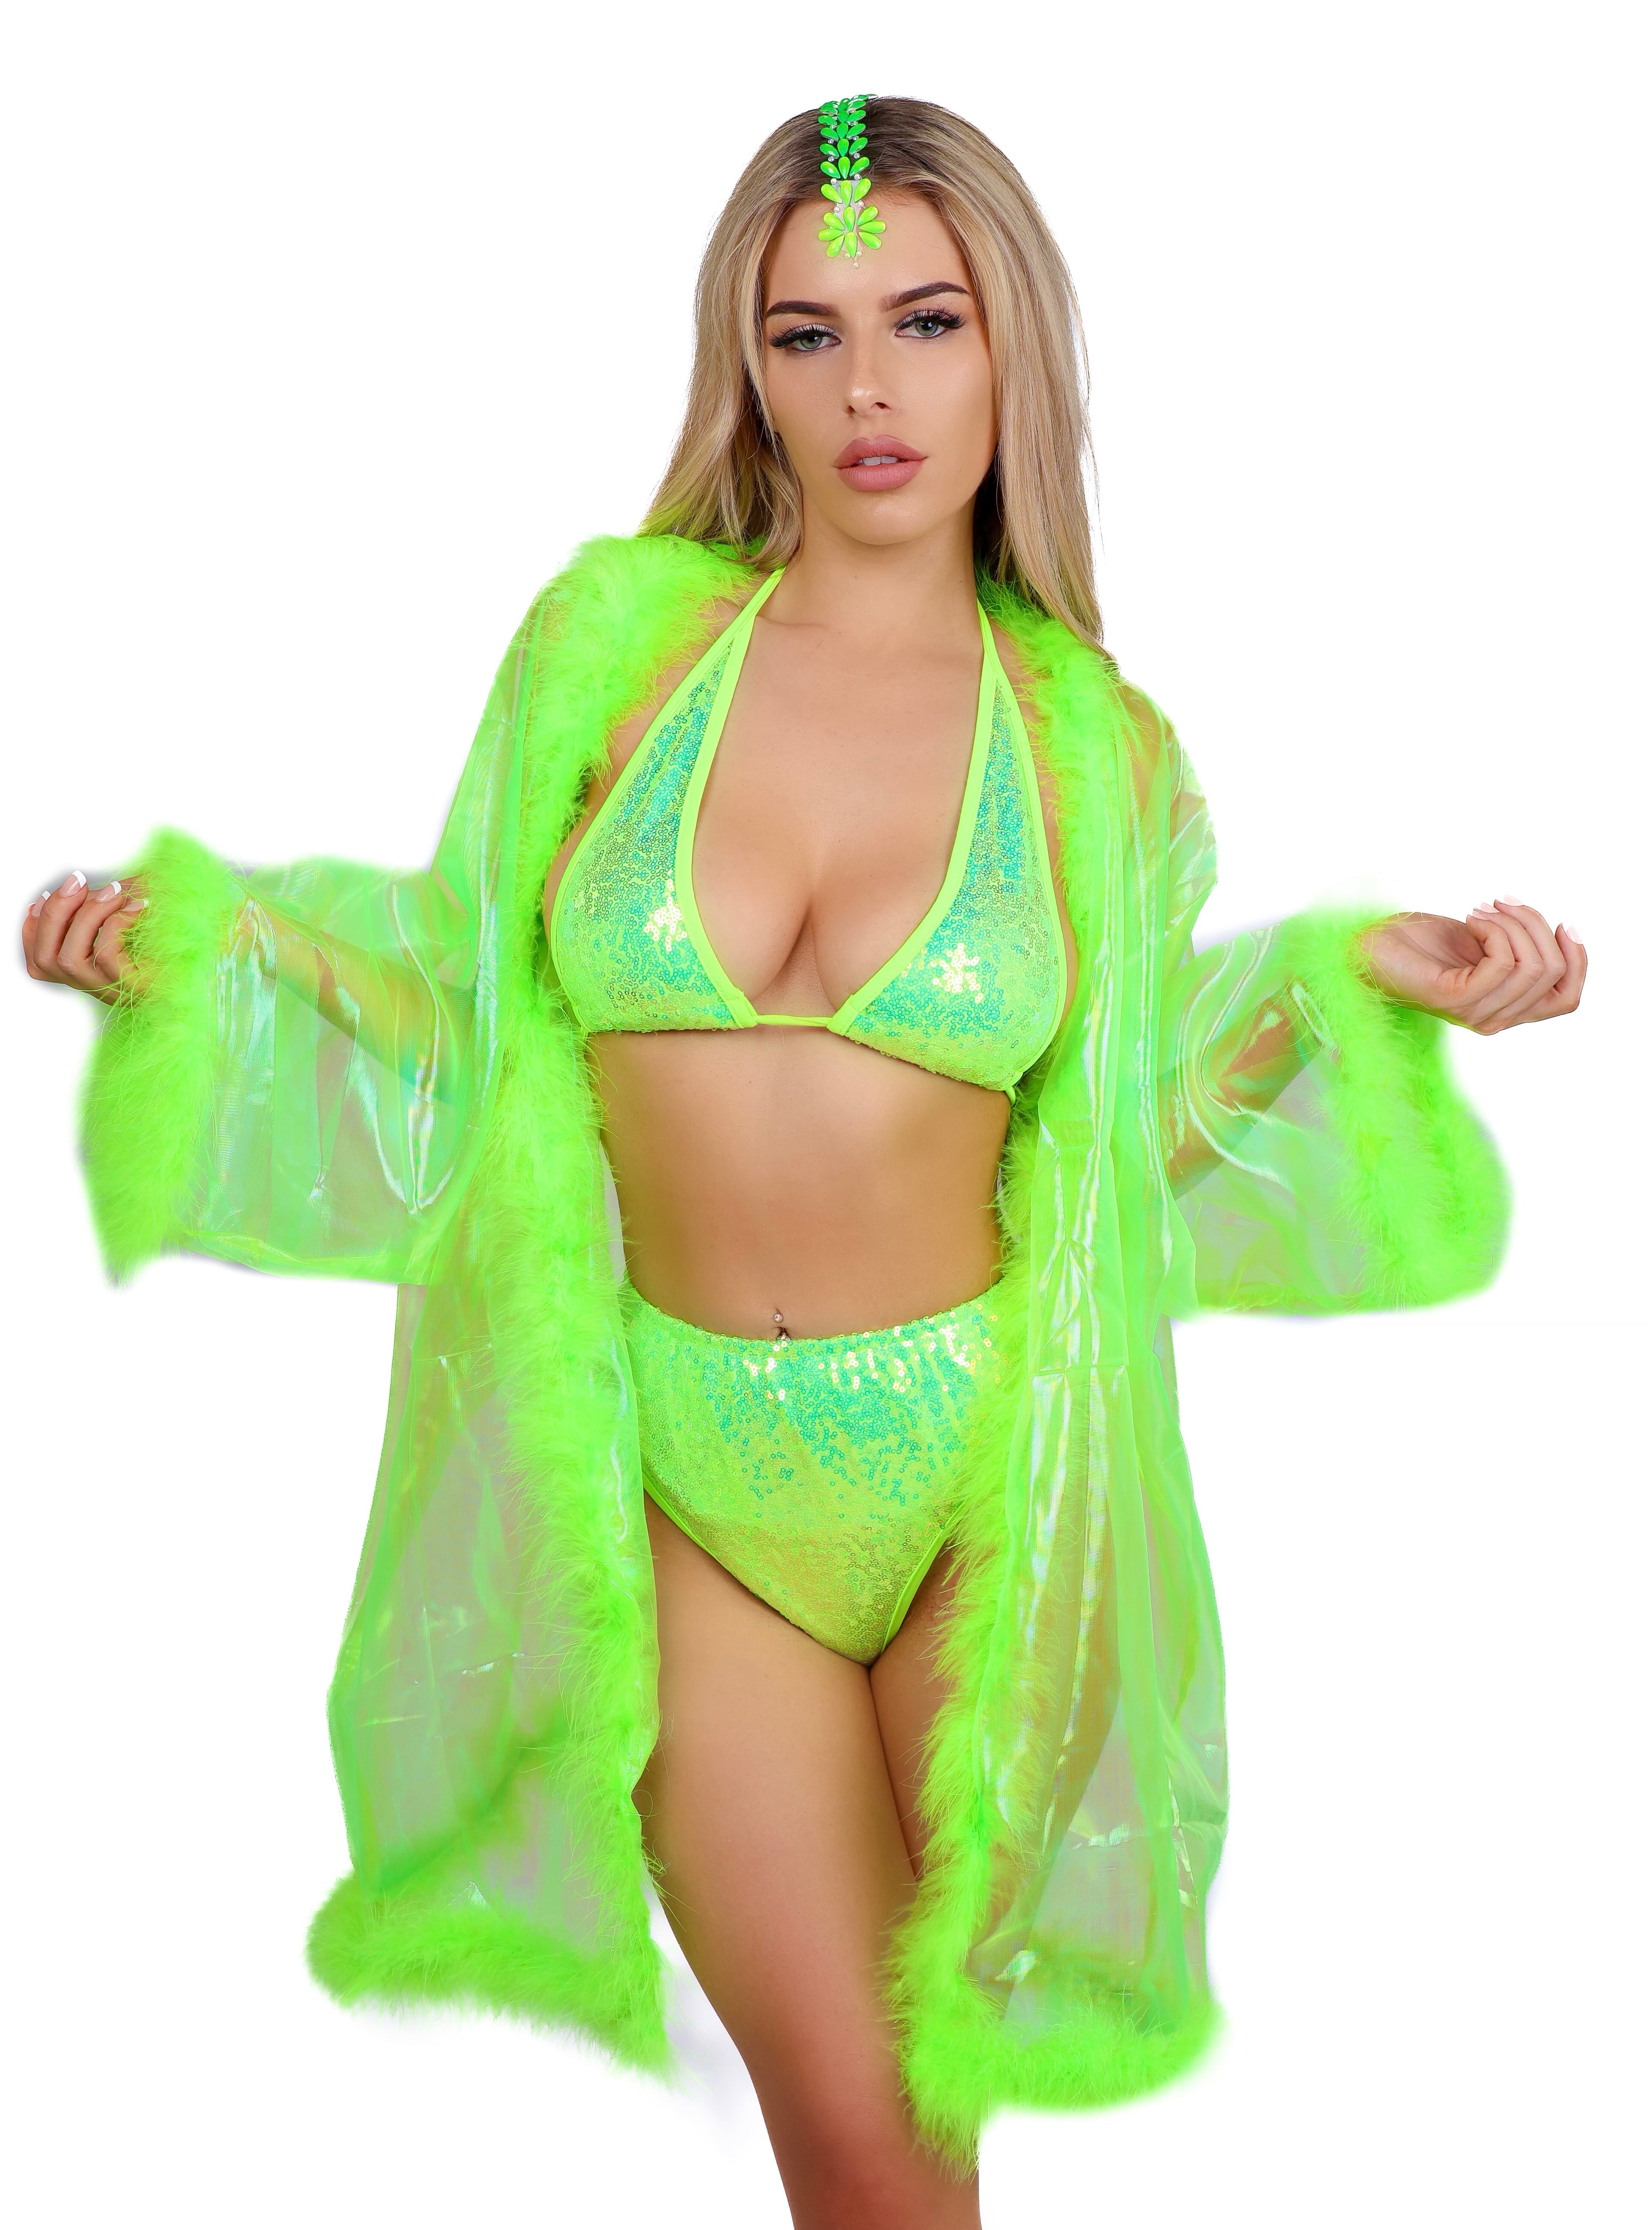 FULL OUTFIT - Neon Lime Princess